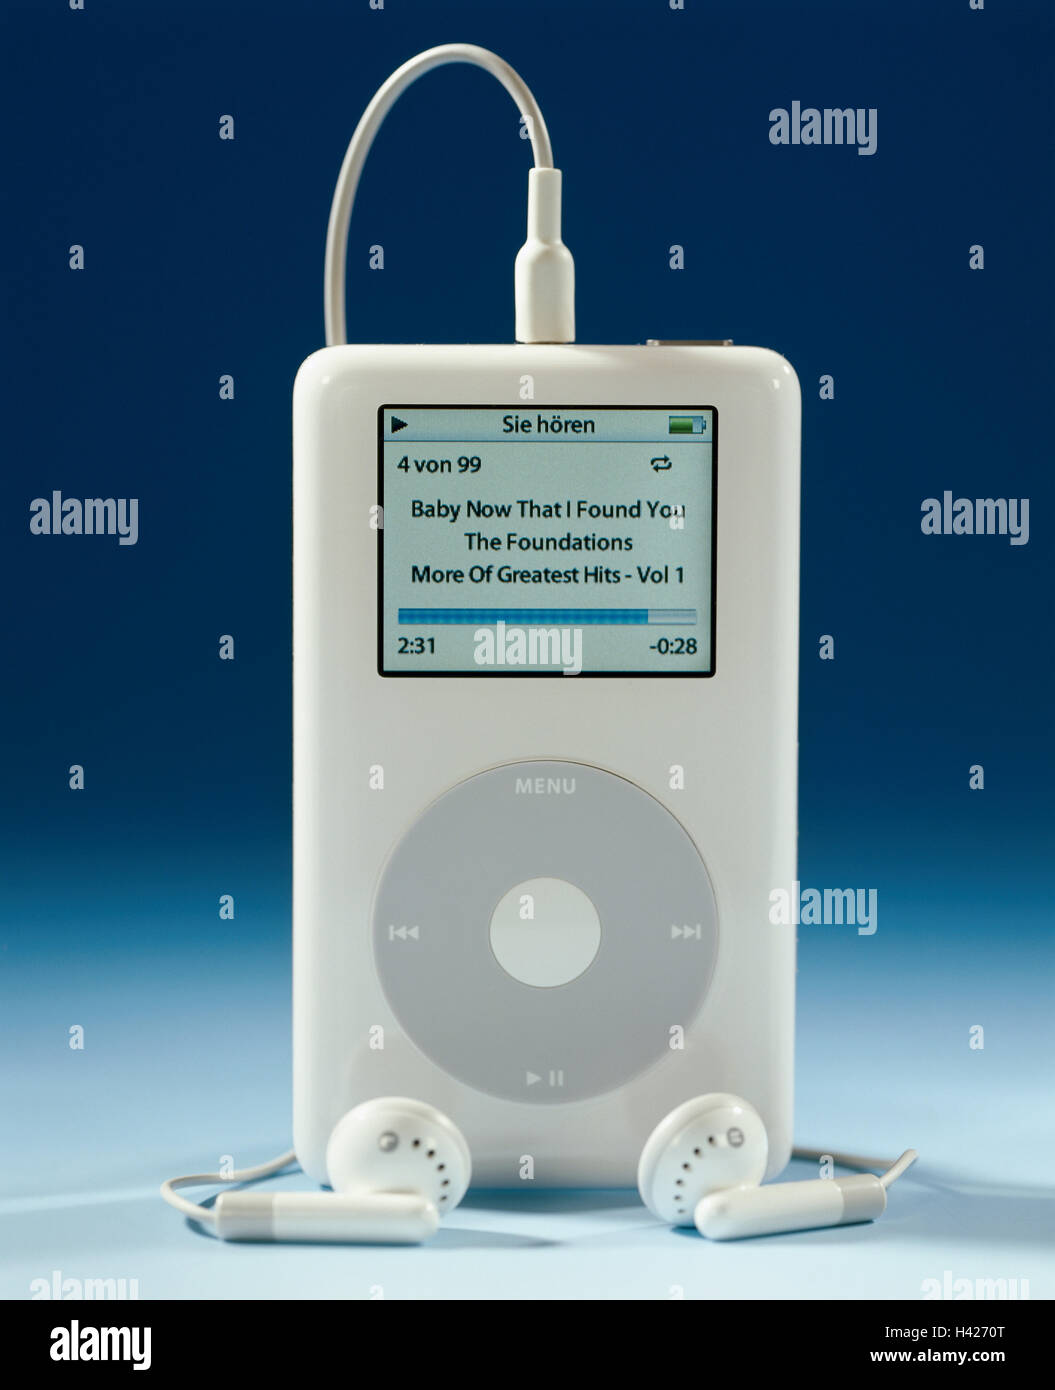 MP3-Player, Apple iPod photo, no property release, Conversation  electronics, technology, music, music pleasure, digitally, flexibility,  mobility, MP3 Player, display, information, illuminated titles, song  headphones Download, transportable, up-to-date ...